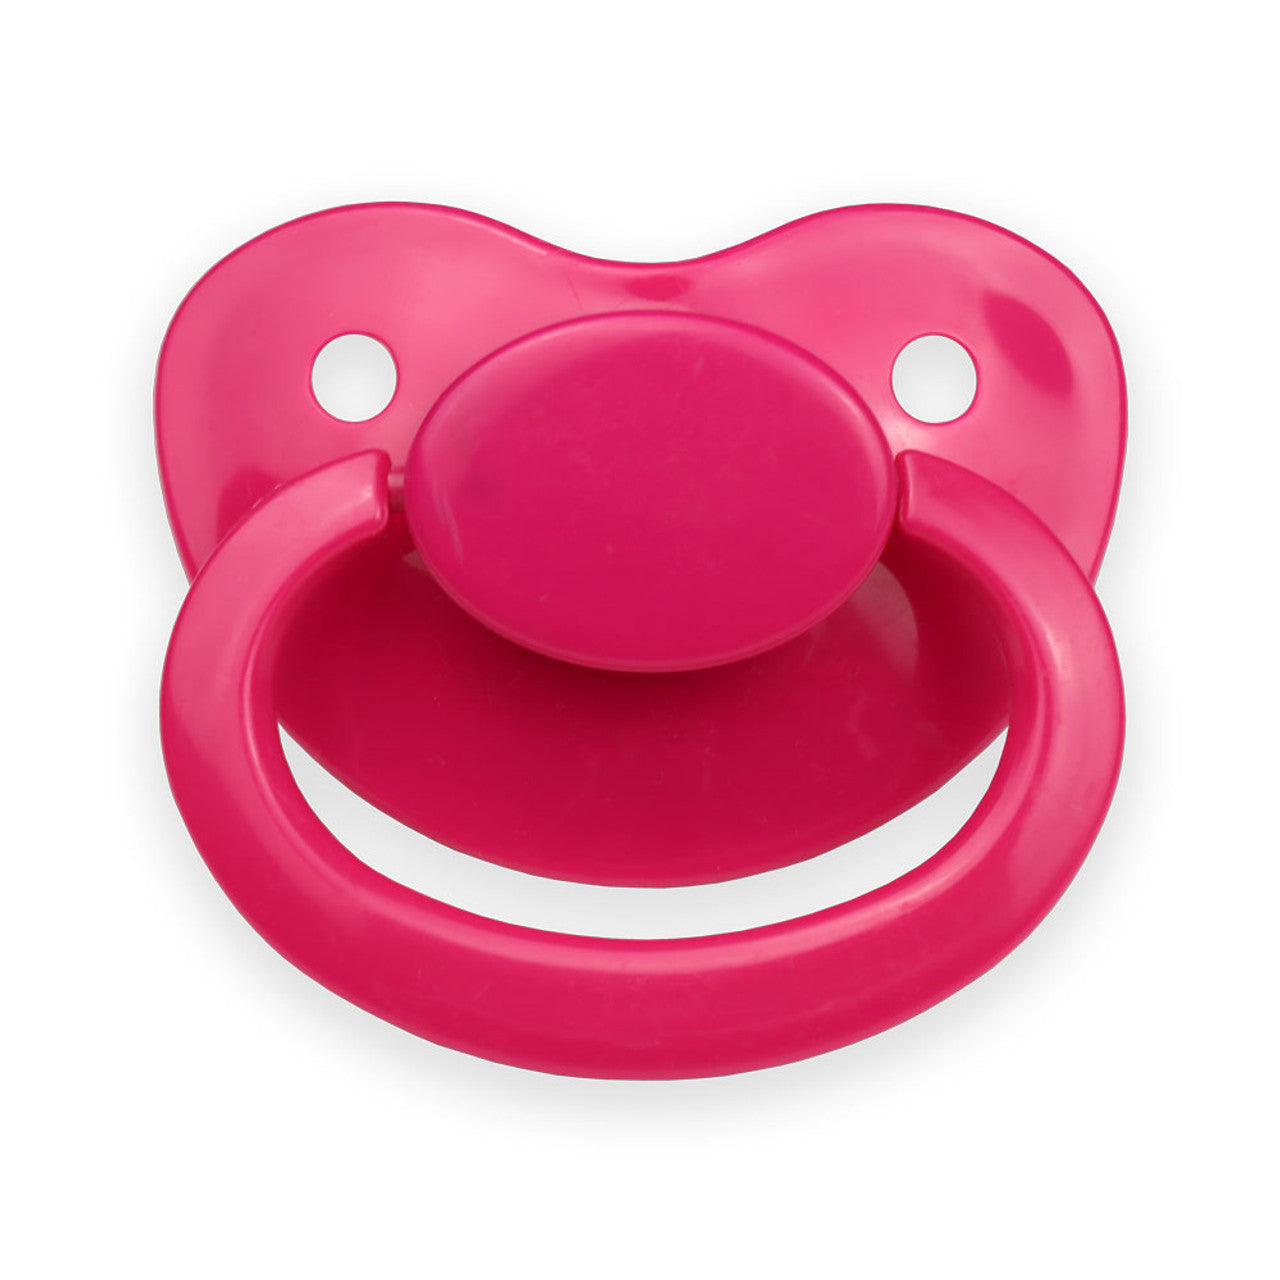 Adult Size 6 Pacifier magenta